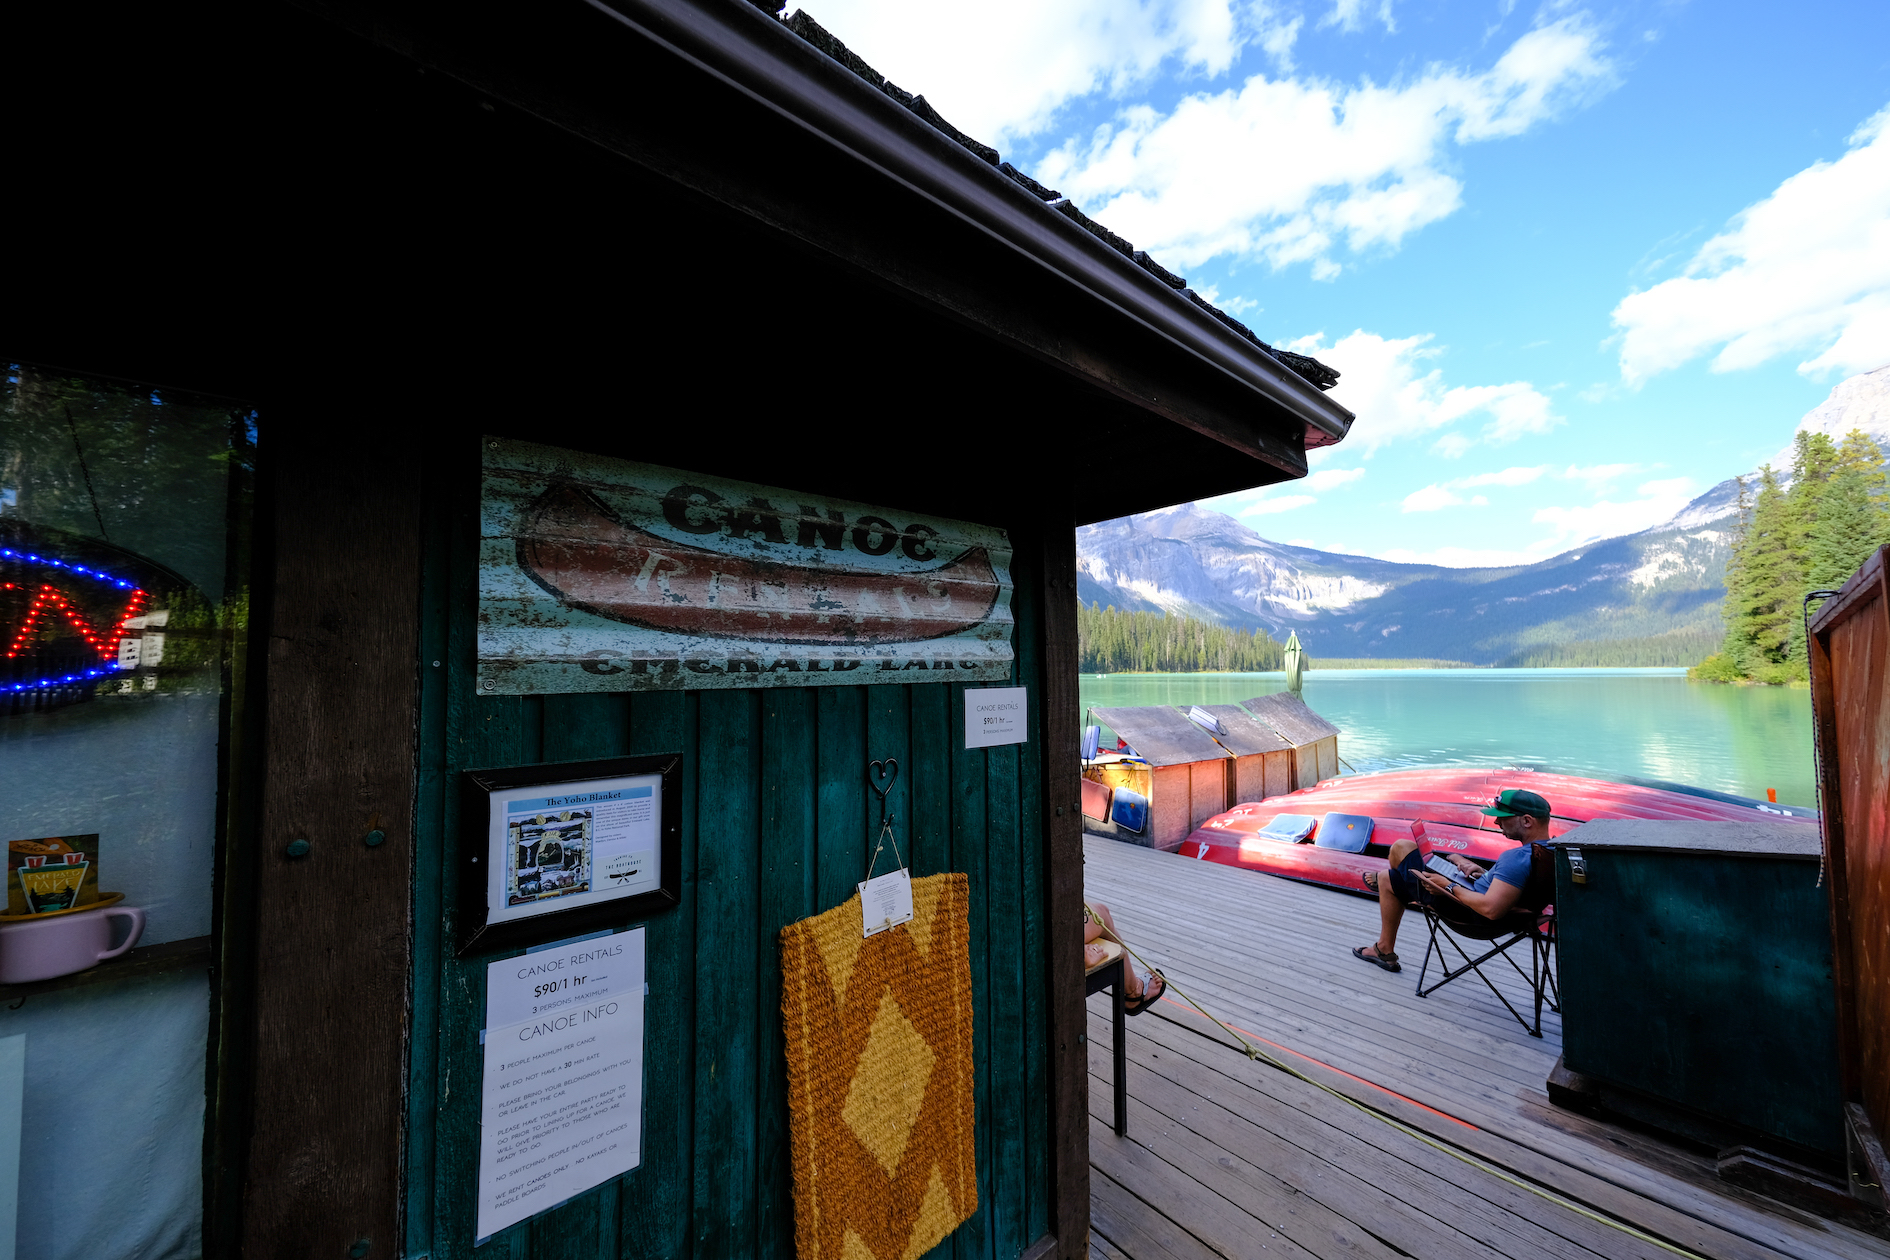 Can You Bring Your Own Canoe to Emerald Lake?